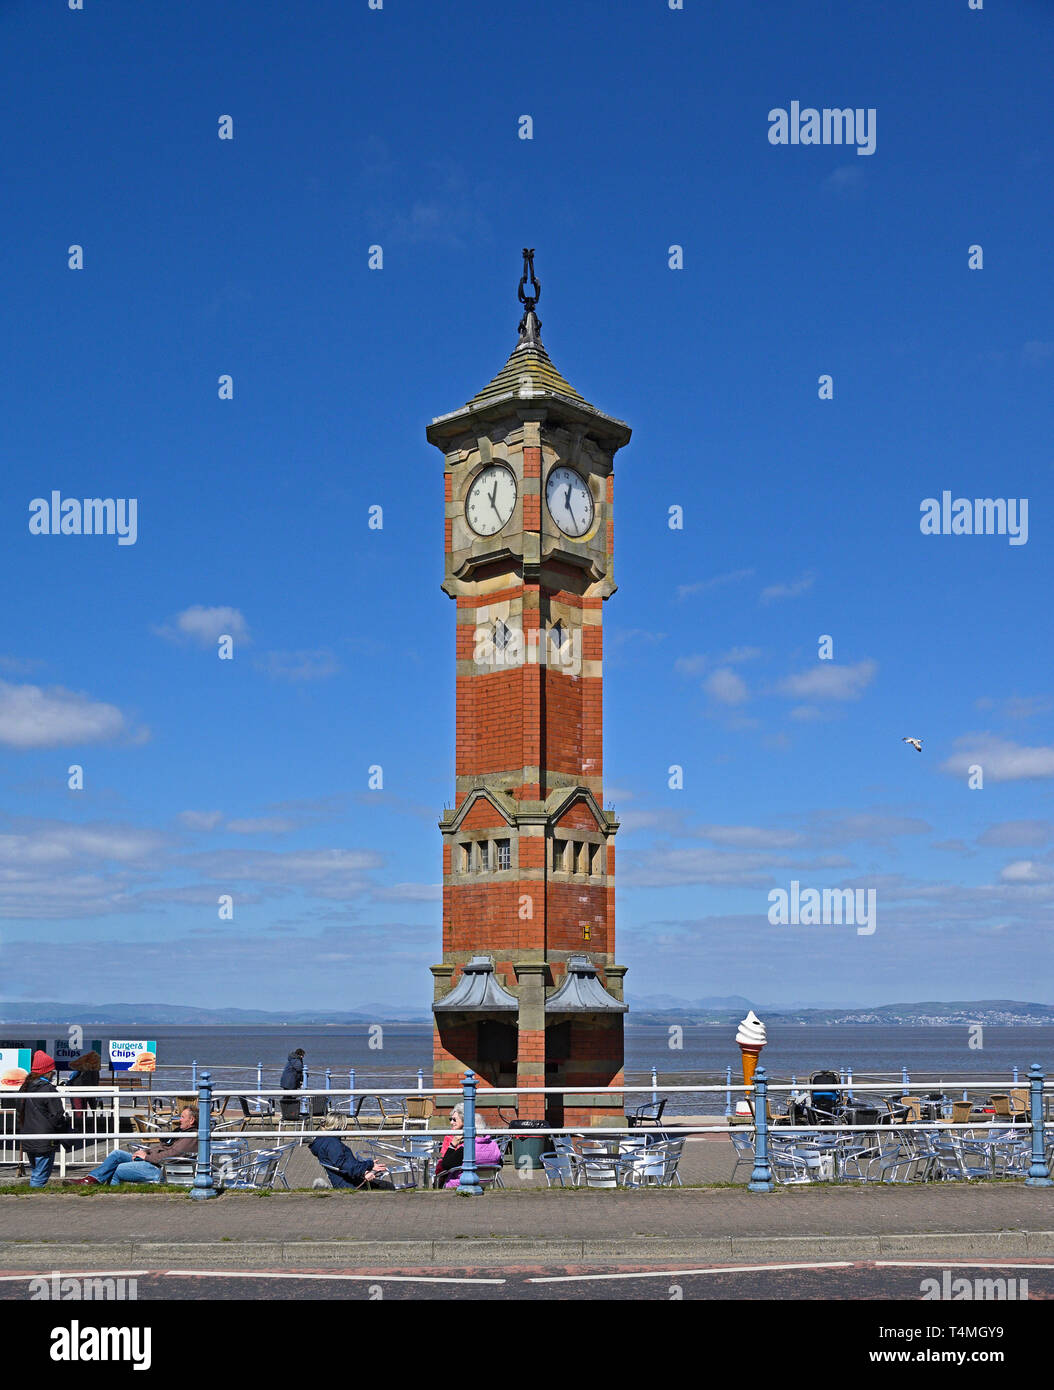 The Clock Tower and the Clock Tower Cafe. The Promenade, Morecambe, Lancashire, England, United Kingdom, Europe. Stock Photo